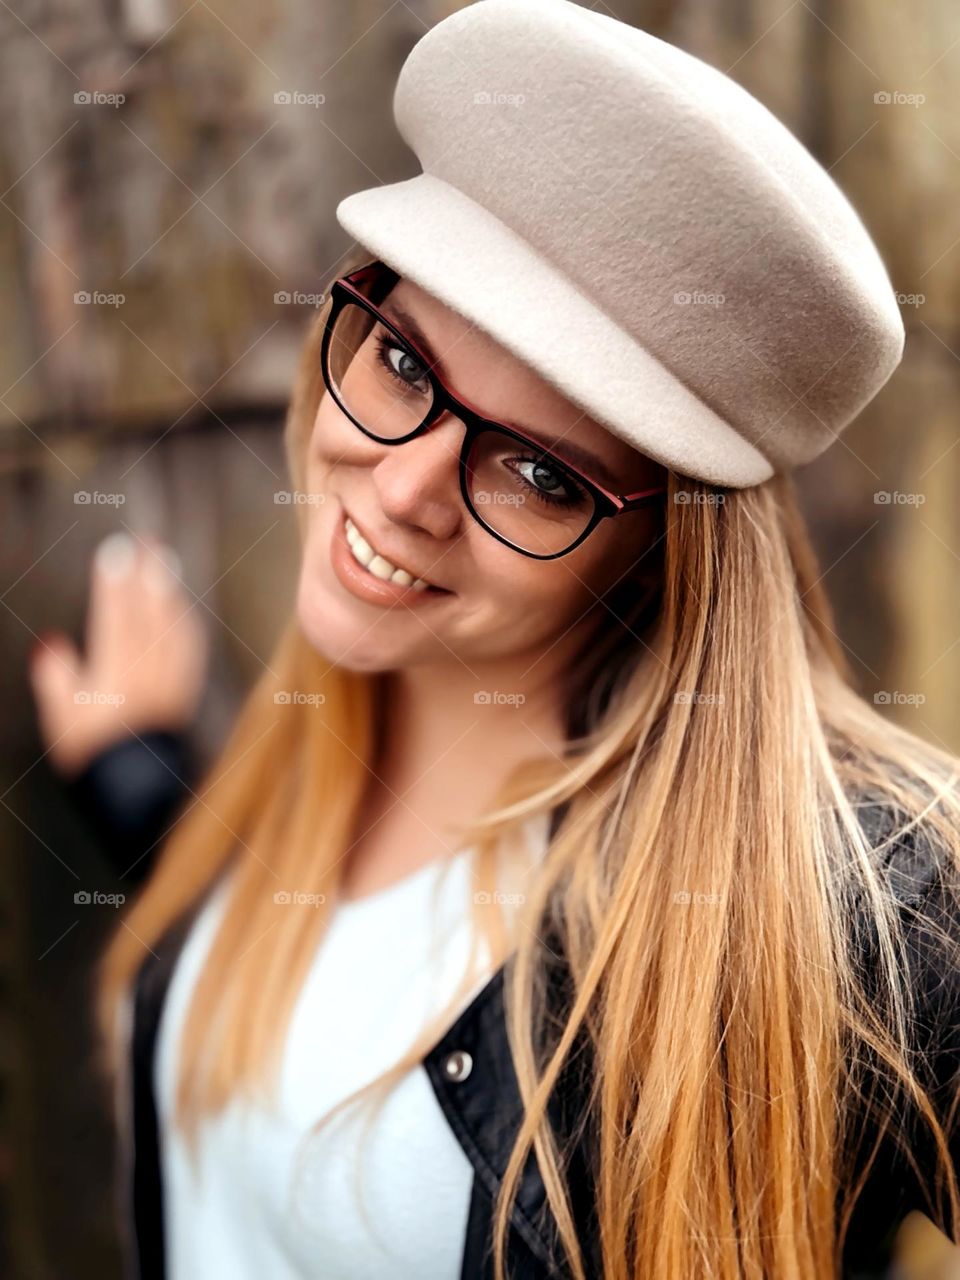 Smiling young woman 